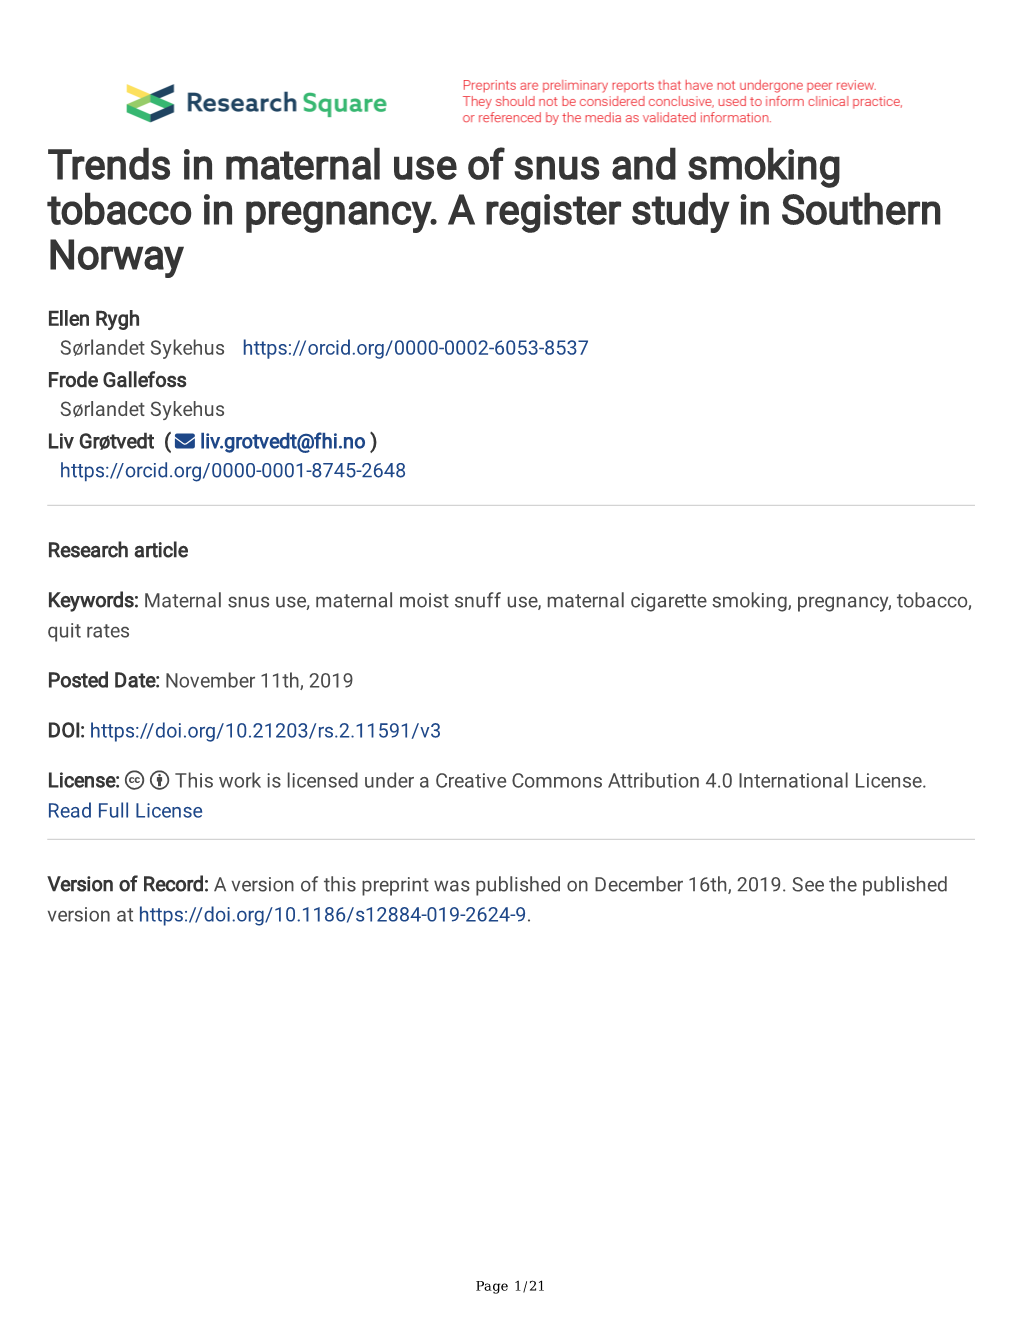 Trends in Maternal Use of Snus and Smoking Tobacco in Pregnancy. a Register Study in Southern Norway